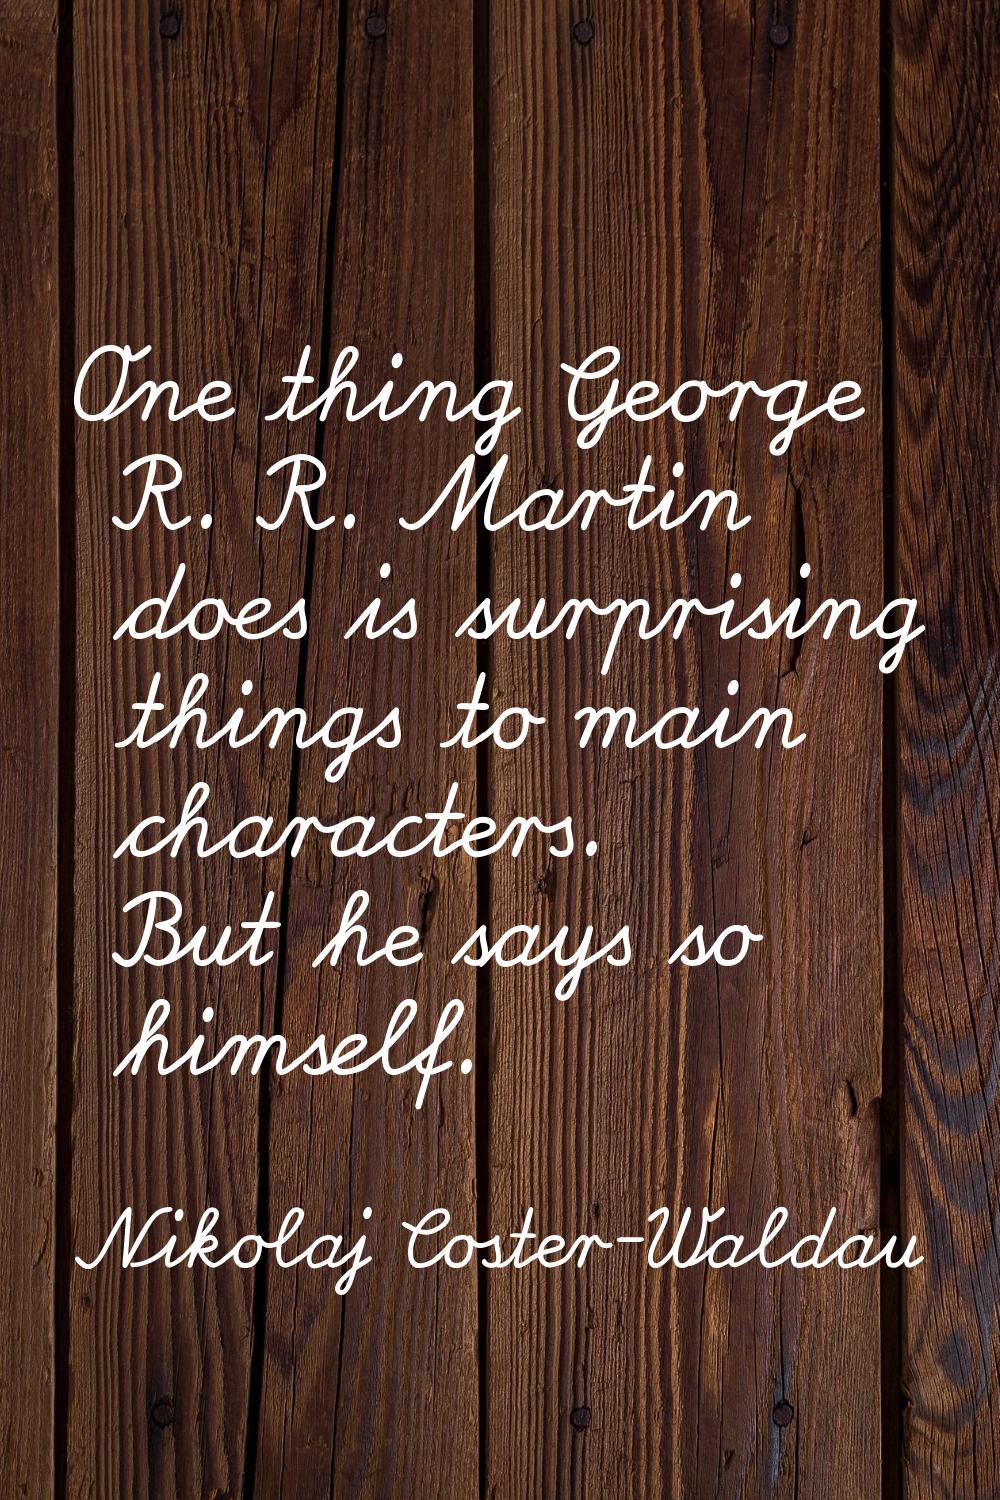 One thing George R. R. Martin does is surprising things to main characters. But he says so himself.